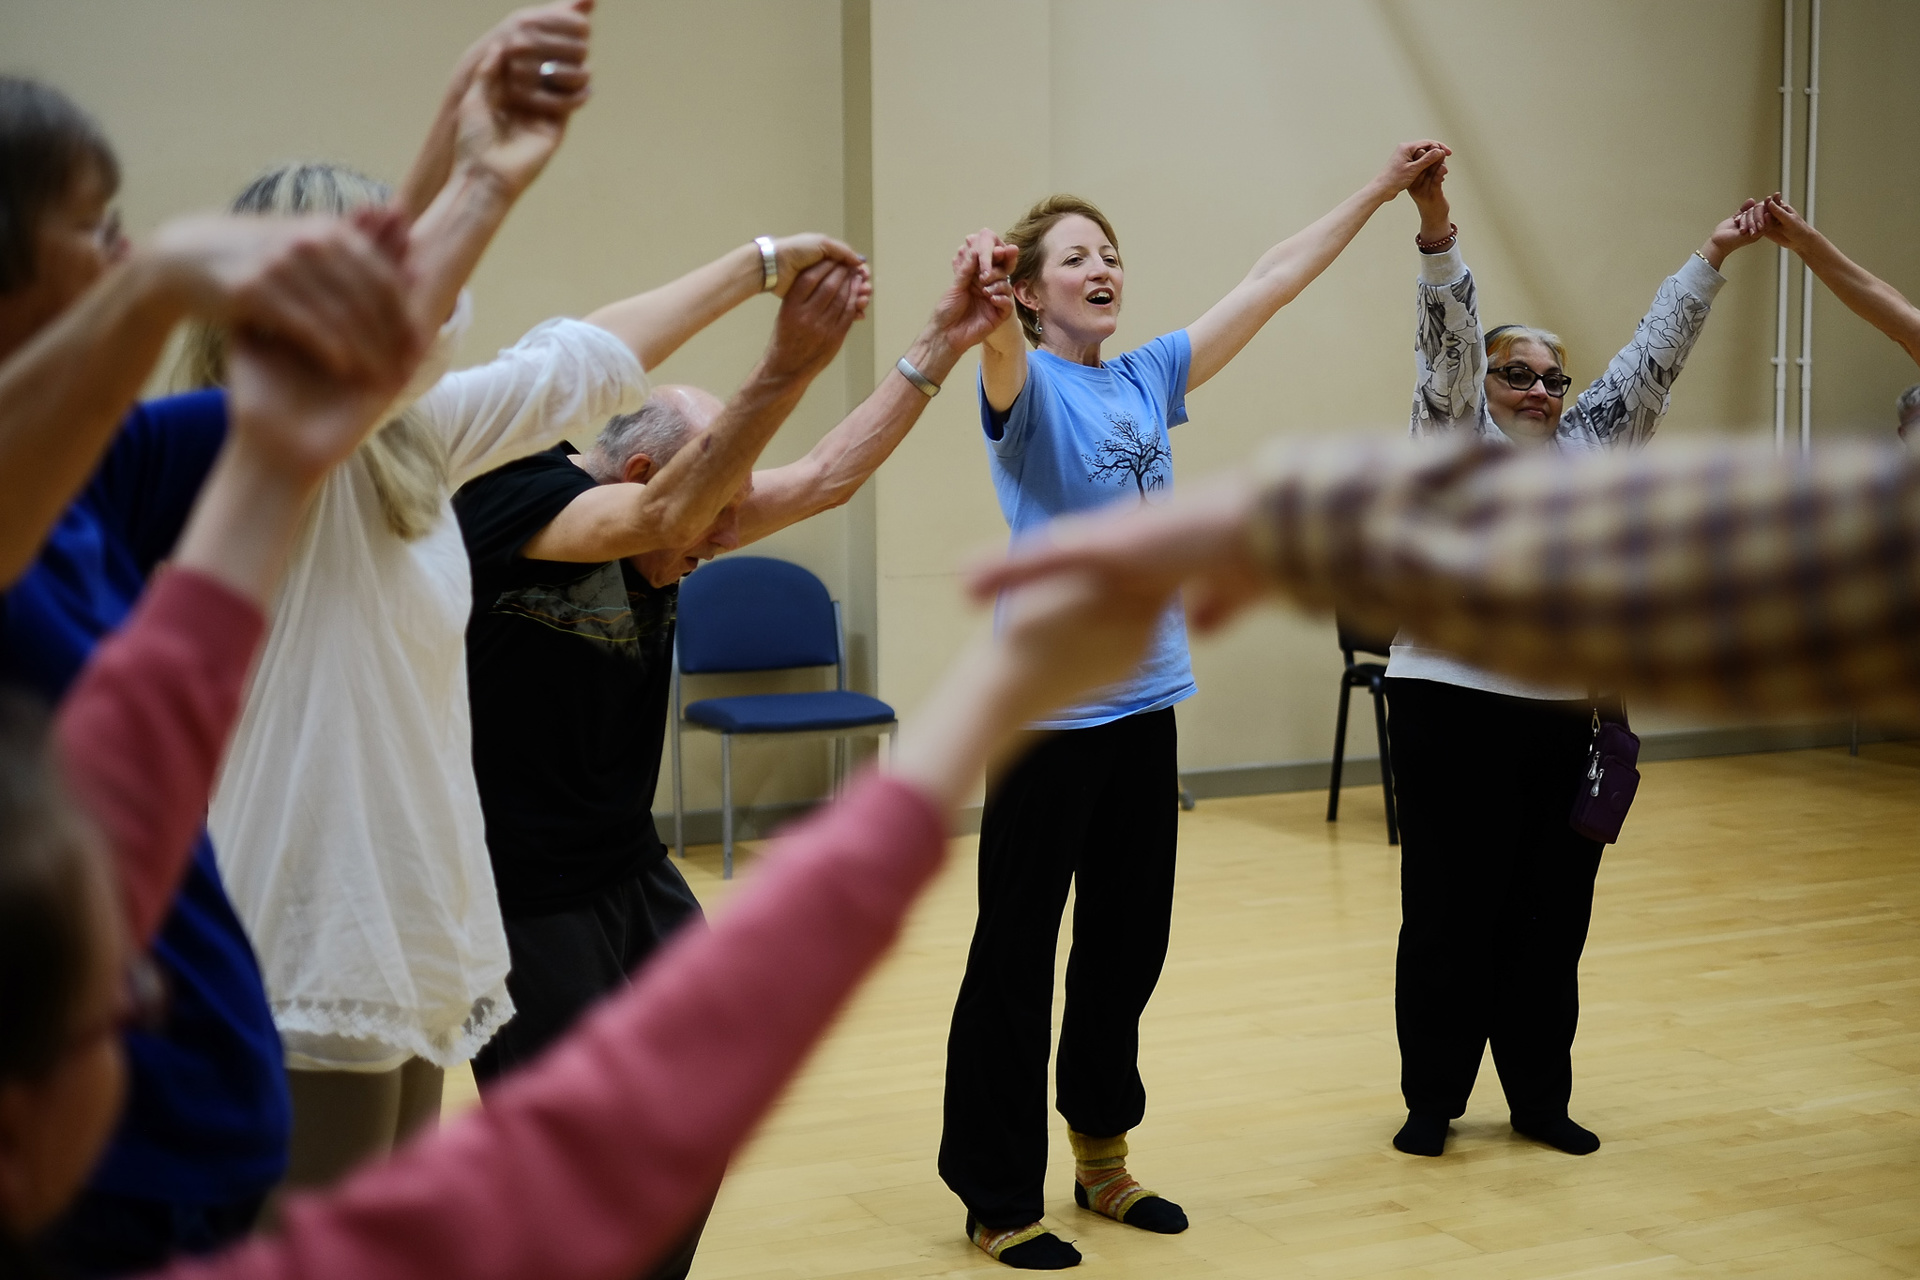 Helen Gould, co-founder of LPM Dance at a Neuro-Moves session. Photo by Johnny Bean.